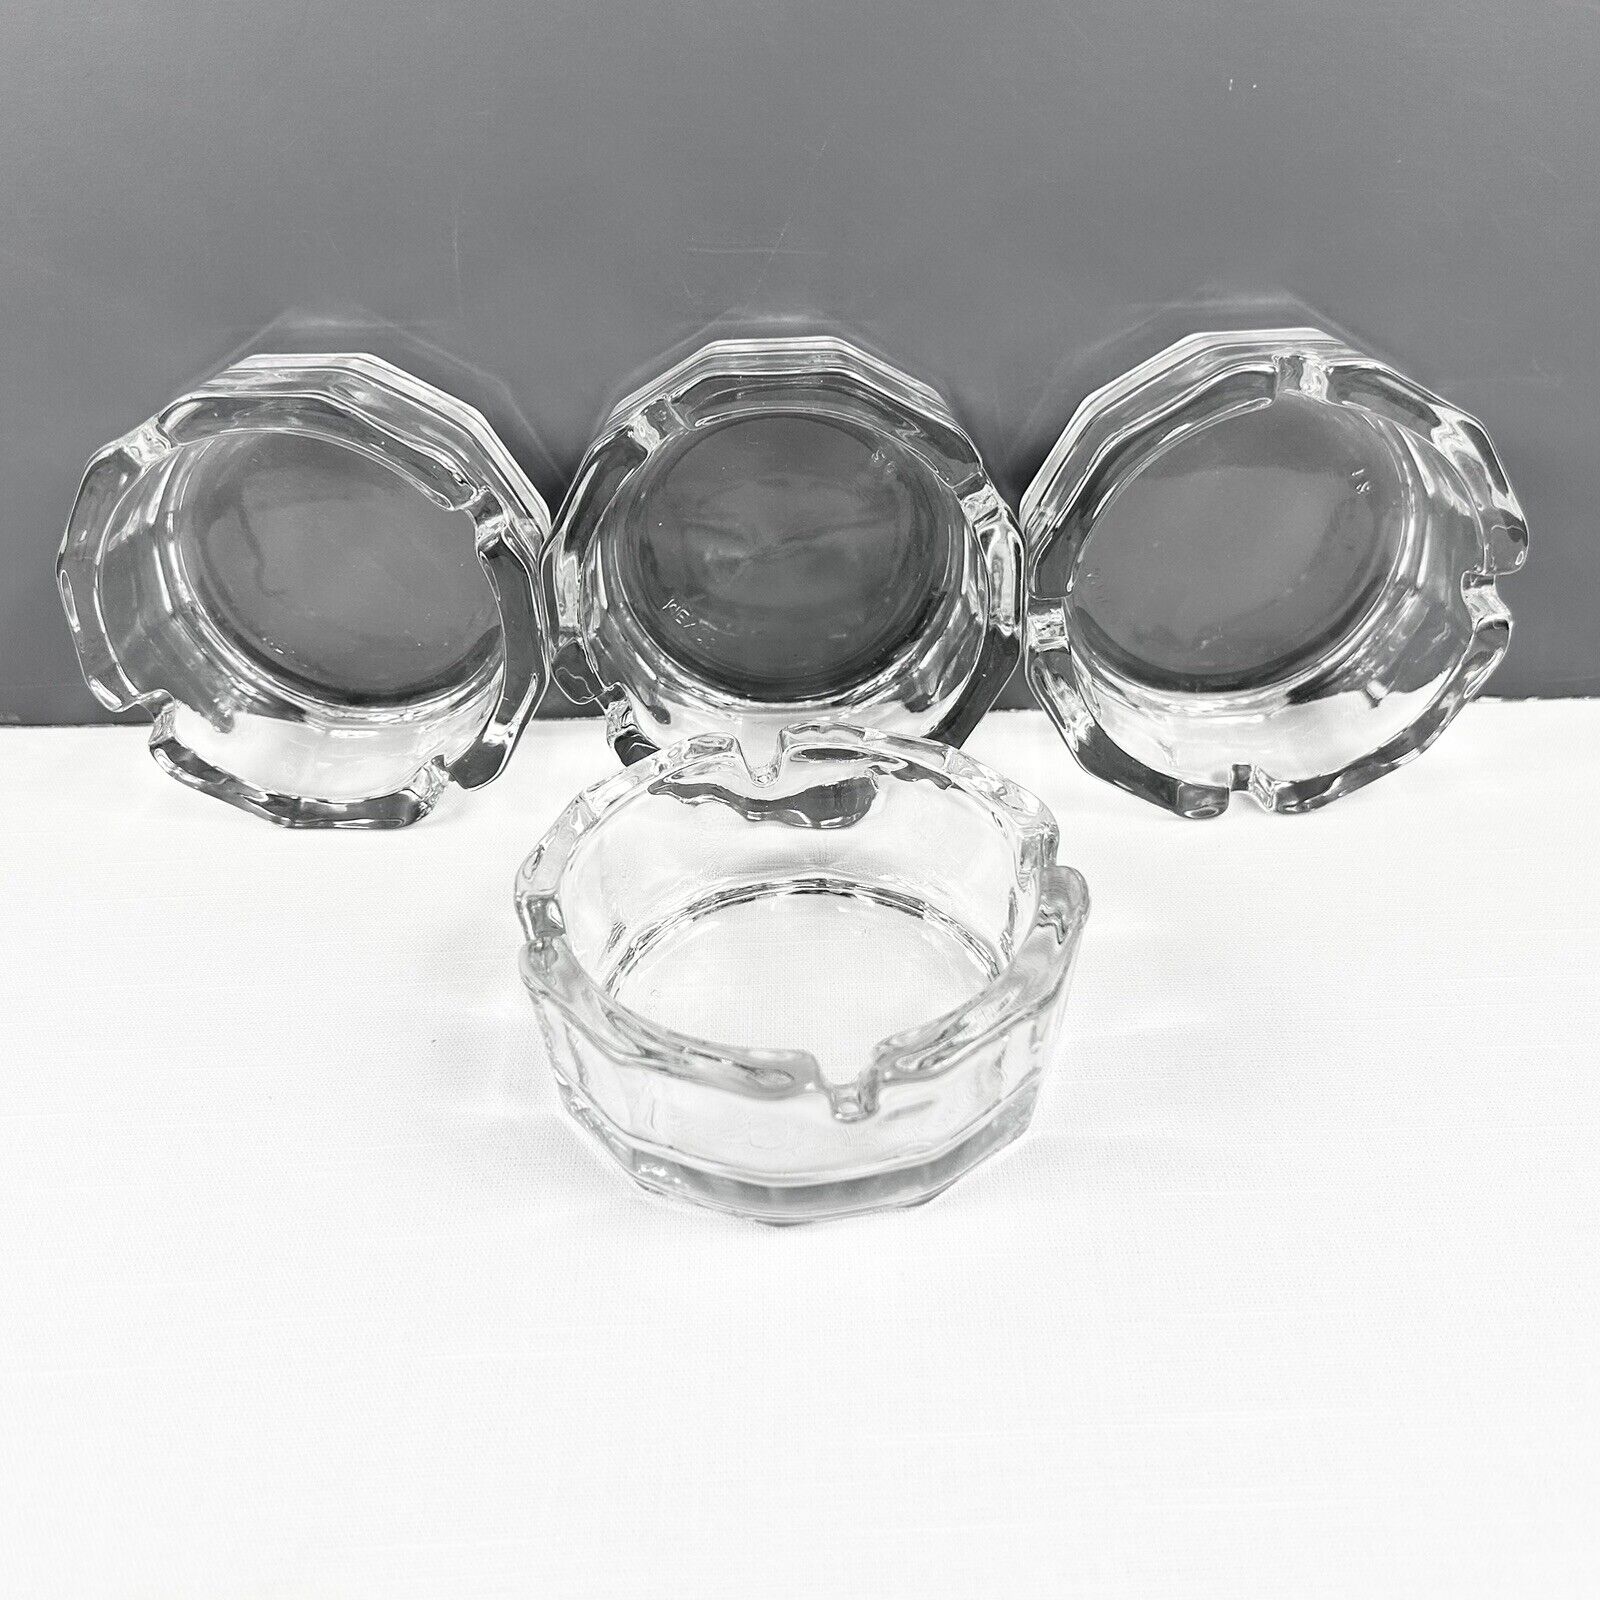 Vintage Clear Glass Ashtray Made in Mexico Set of 4